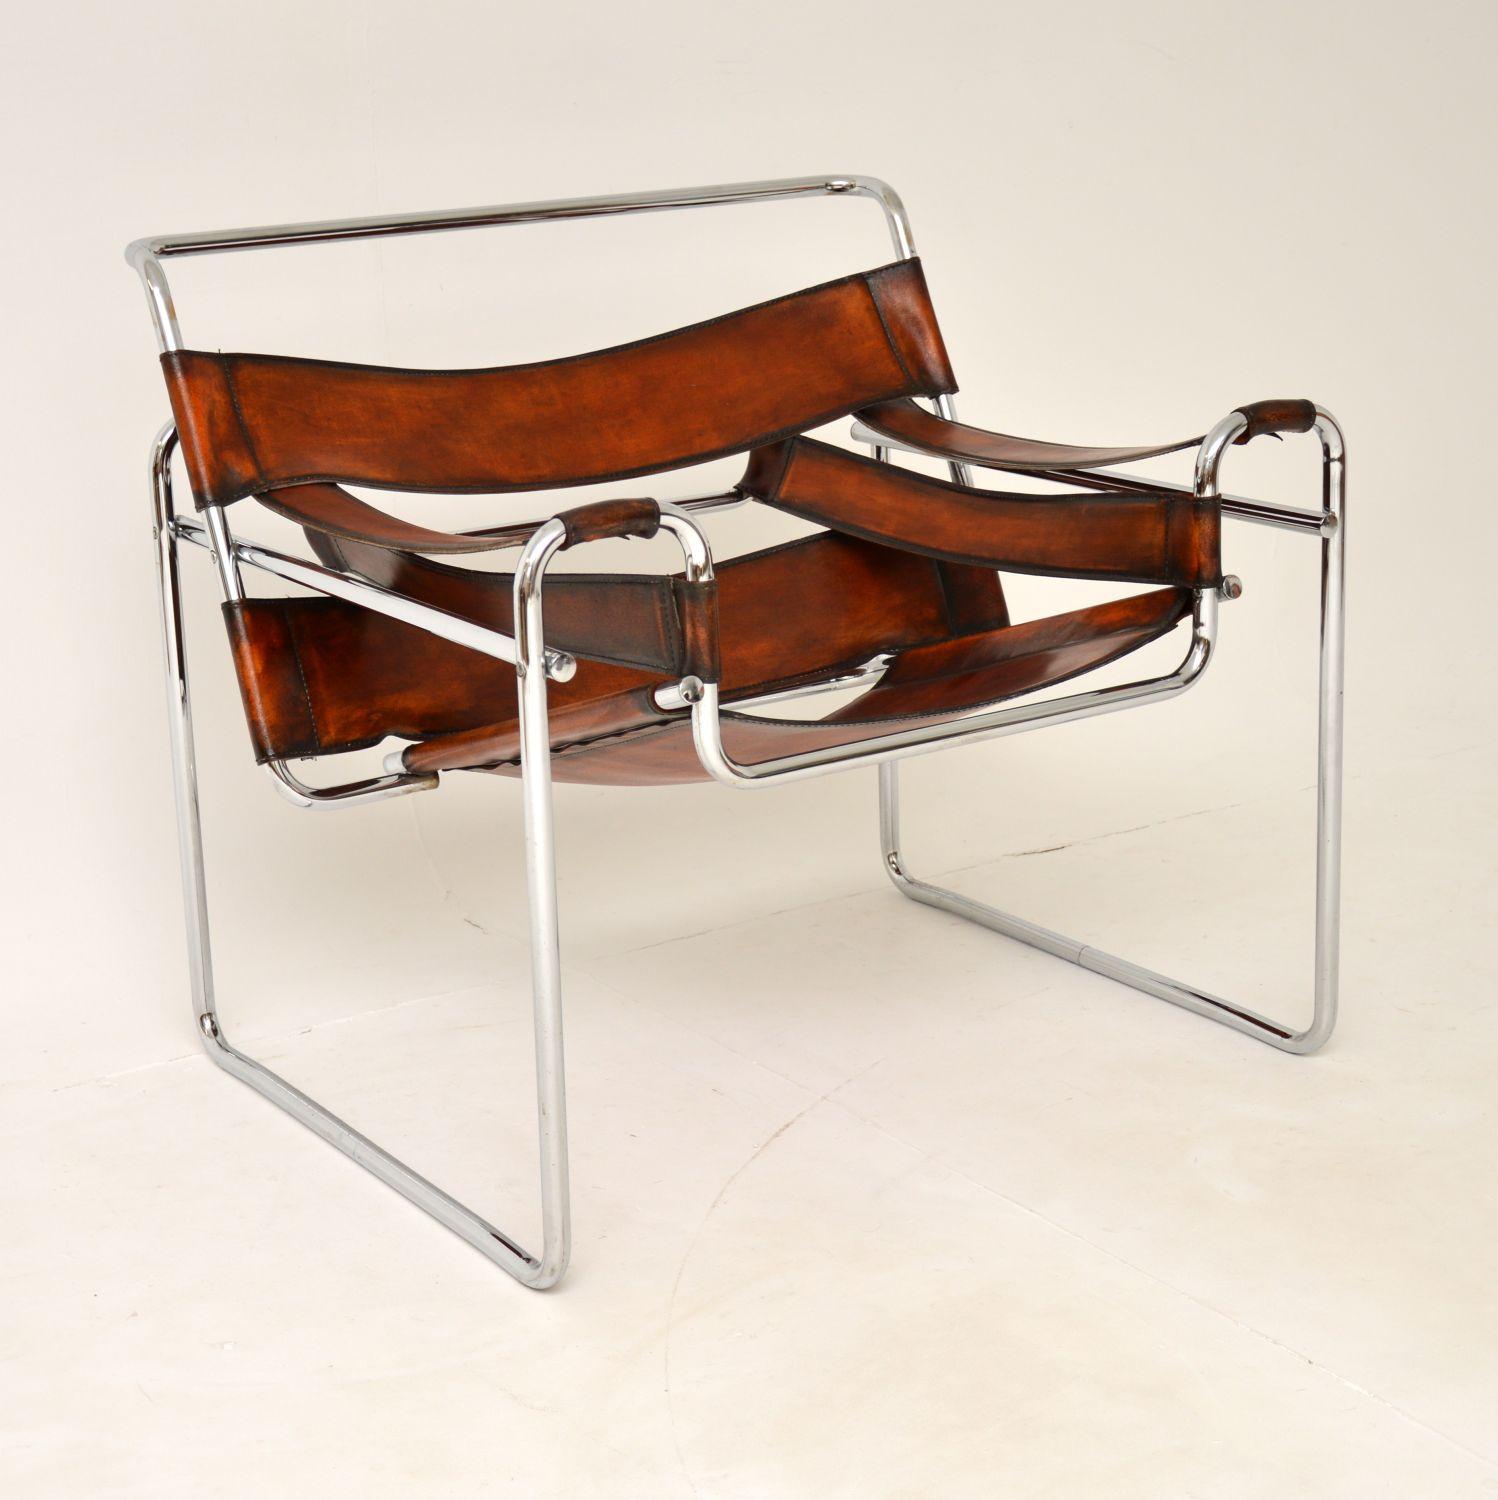 A stylish and iconic ‘Wassily’ armchair originally designed by Marcel Breuer in the 1920’s. This is a 1960’s production most likely by Gavina, made in Italy. It is of super quality and is in nice vintage condition.

We have had this recently hand